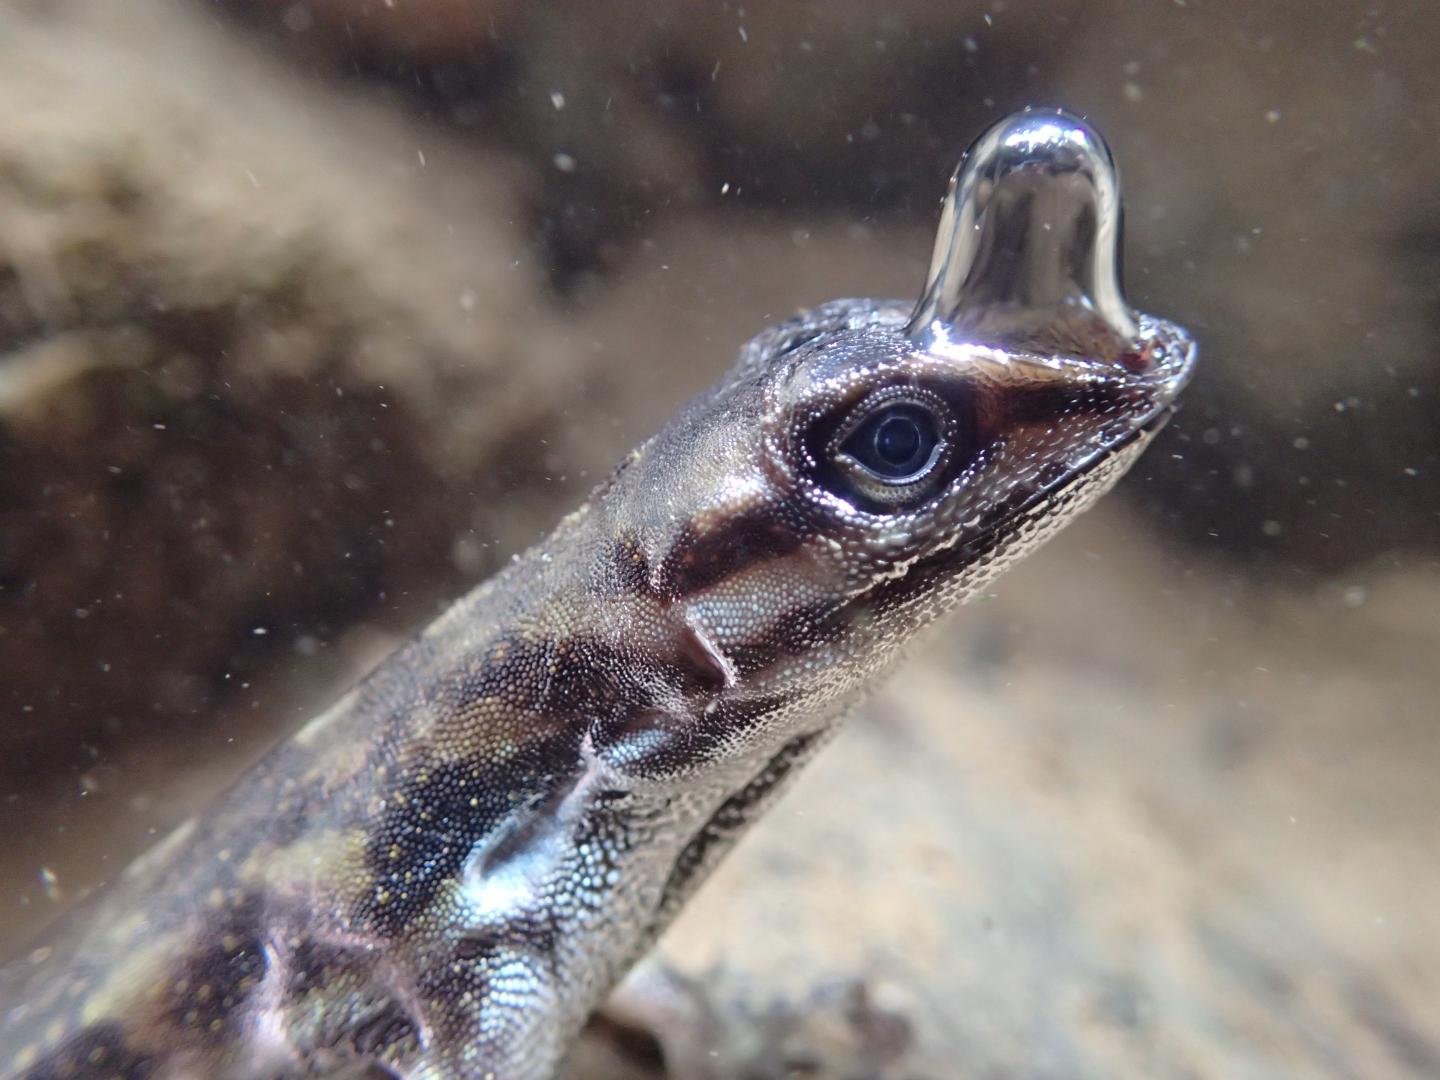 Anolis lizard rebreathing with bubble